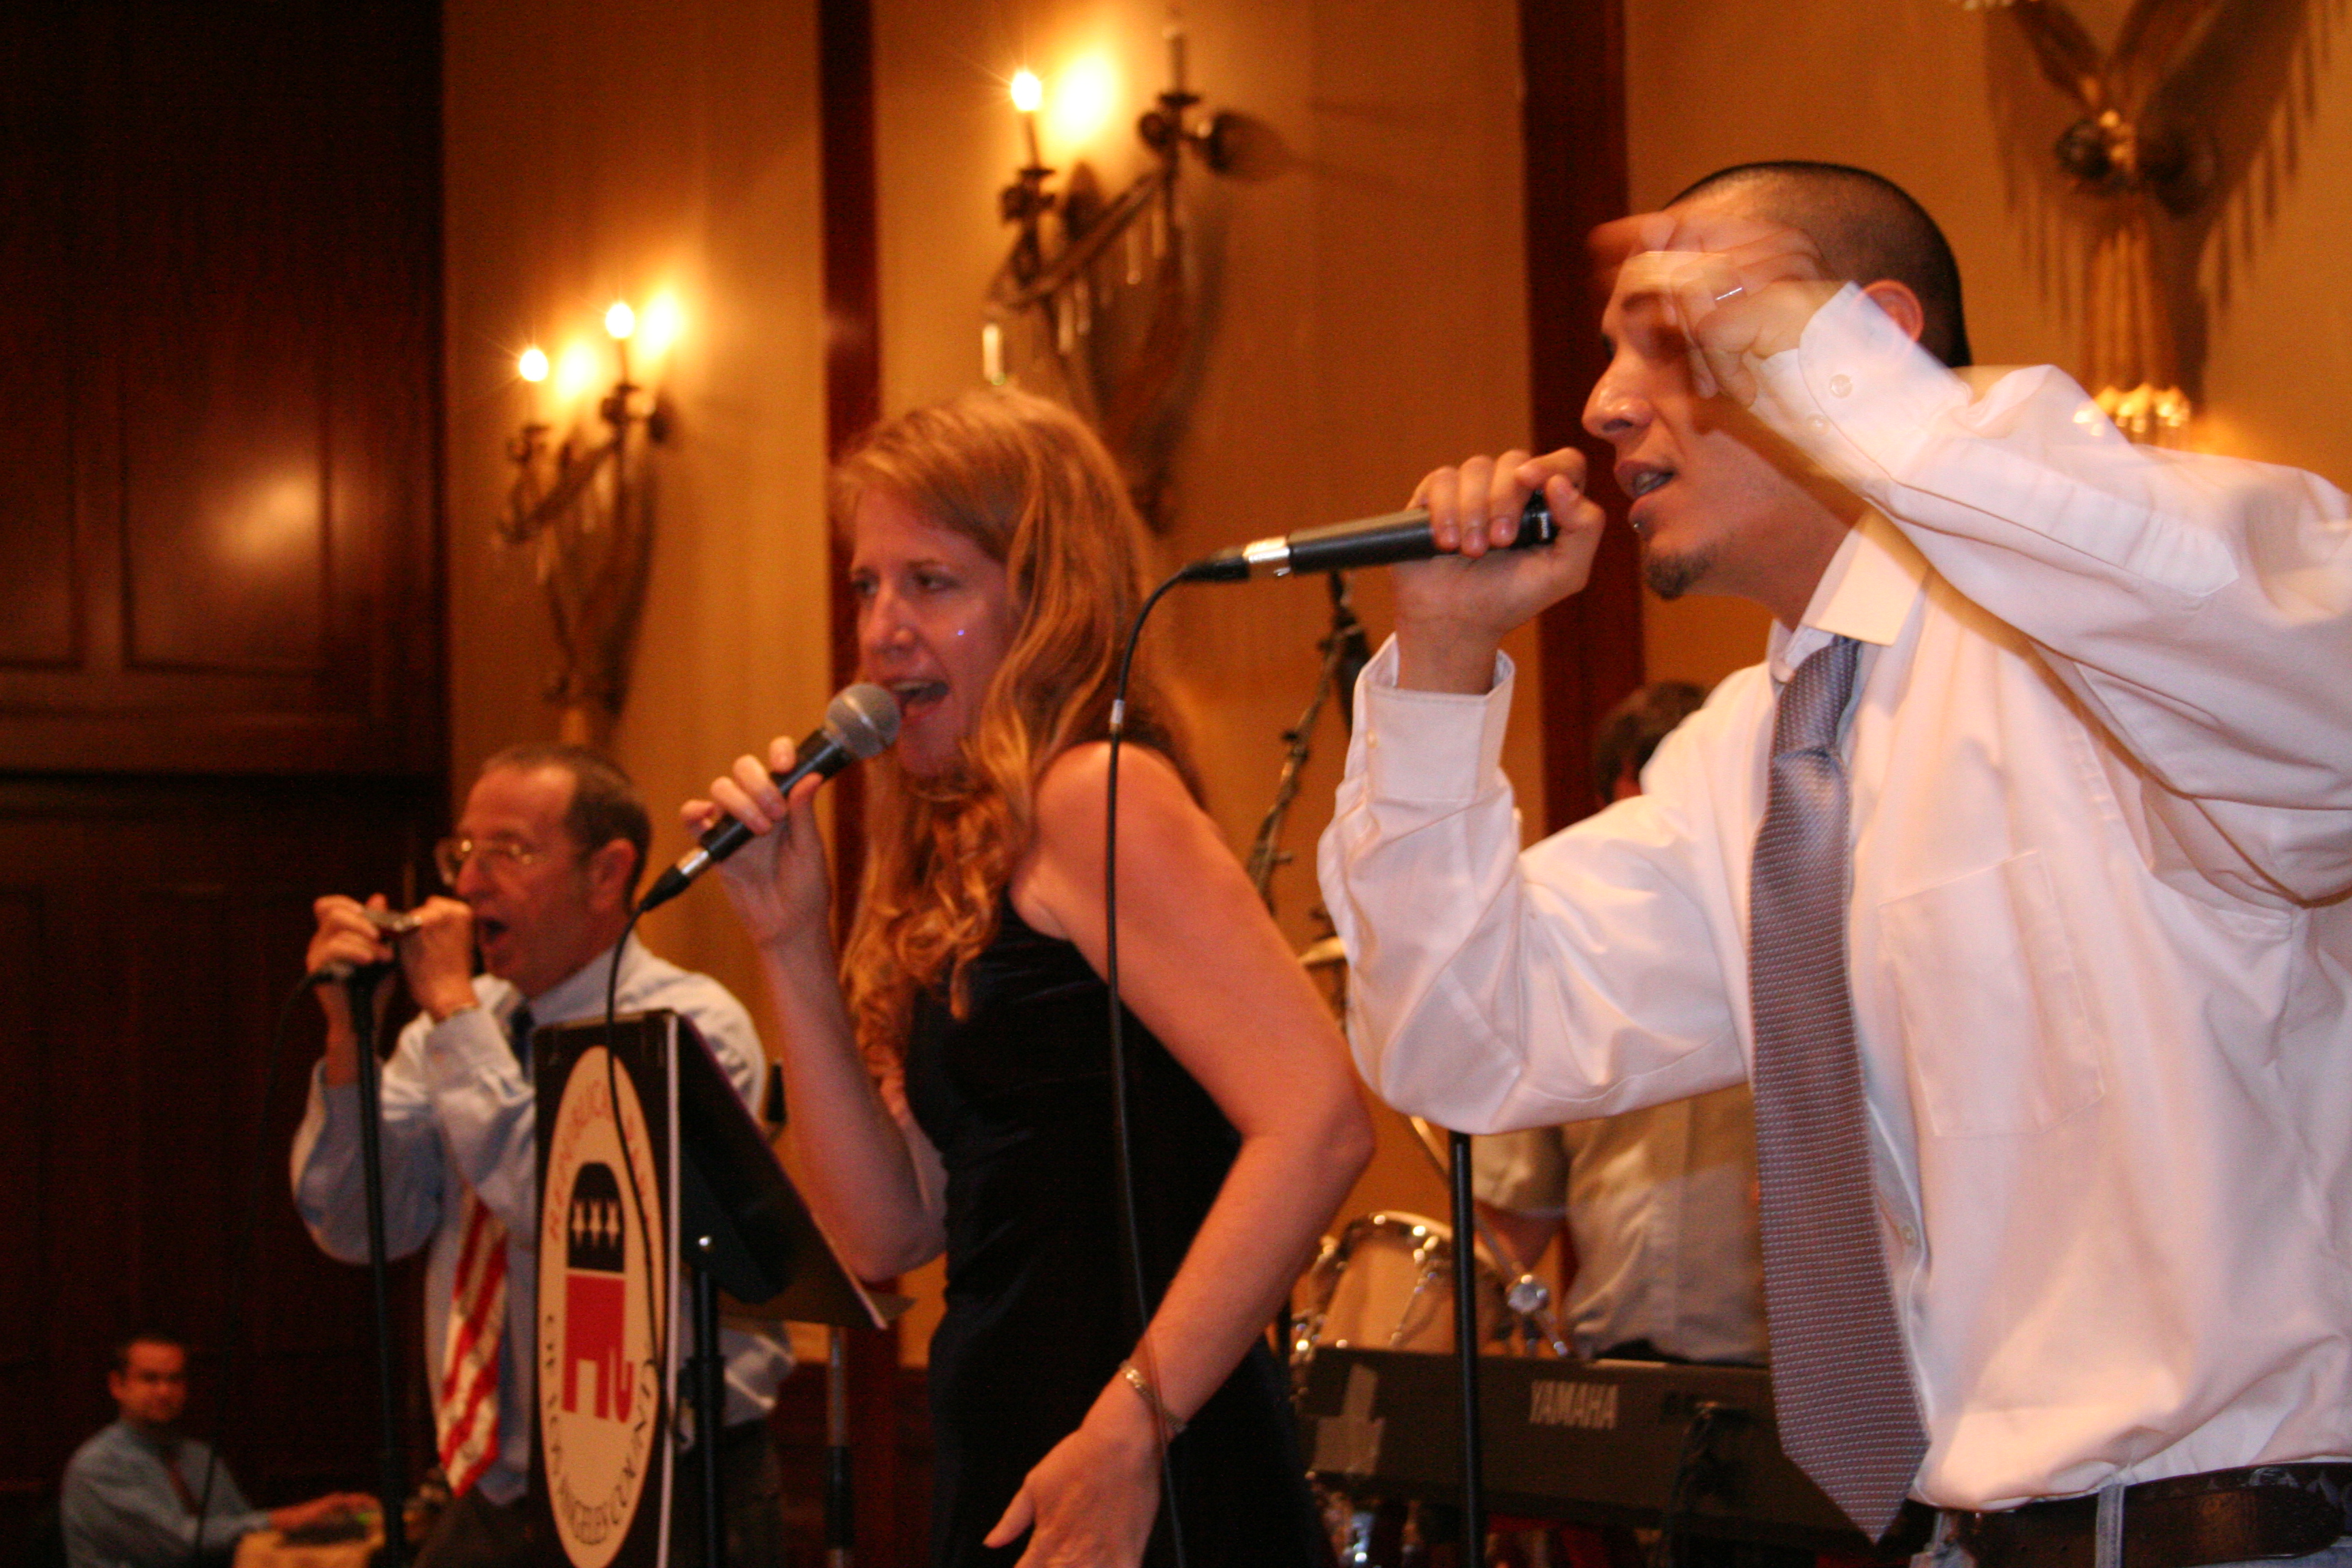 Javelyn performing at governor's political event at Hyatt Regency, Los Angeles